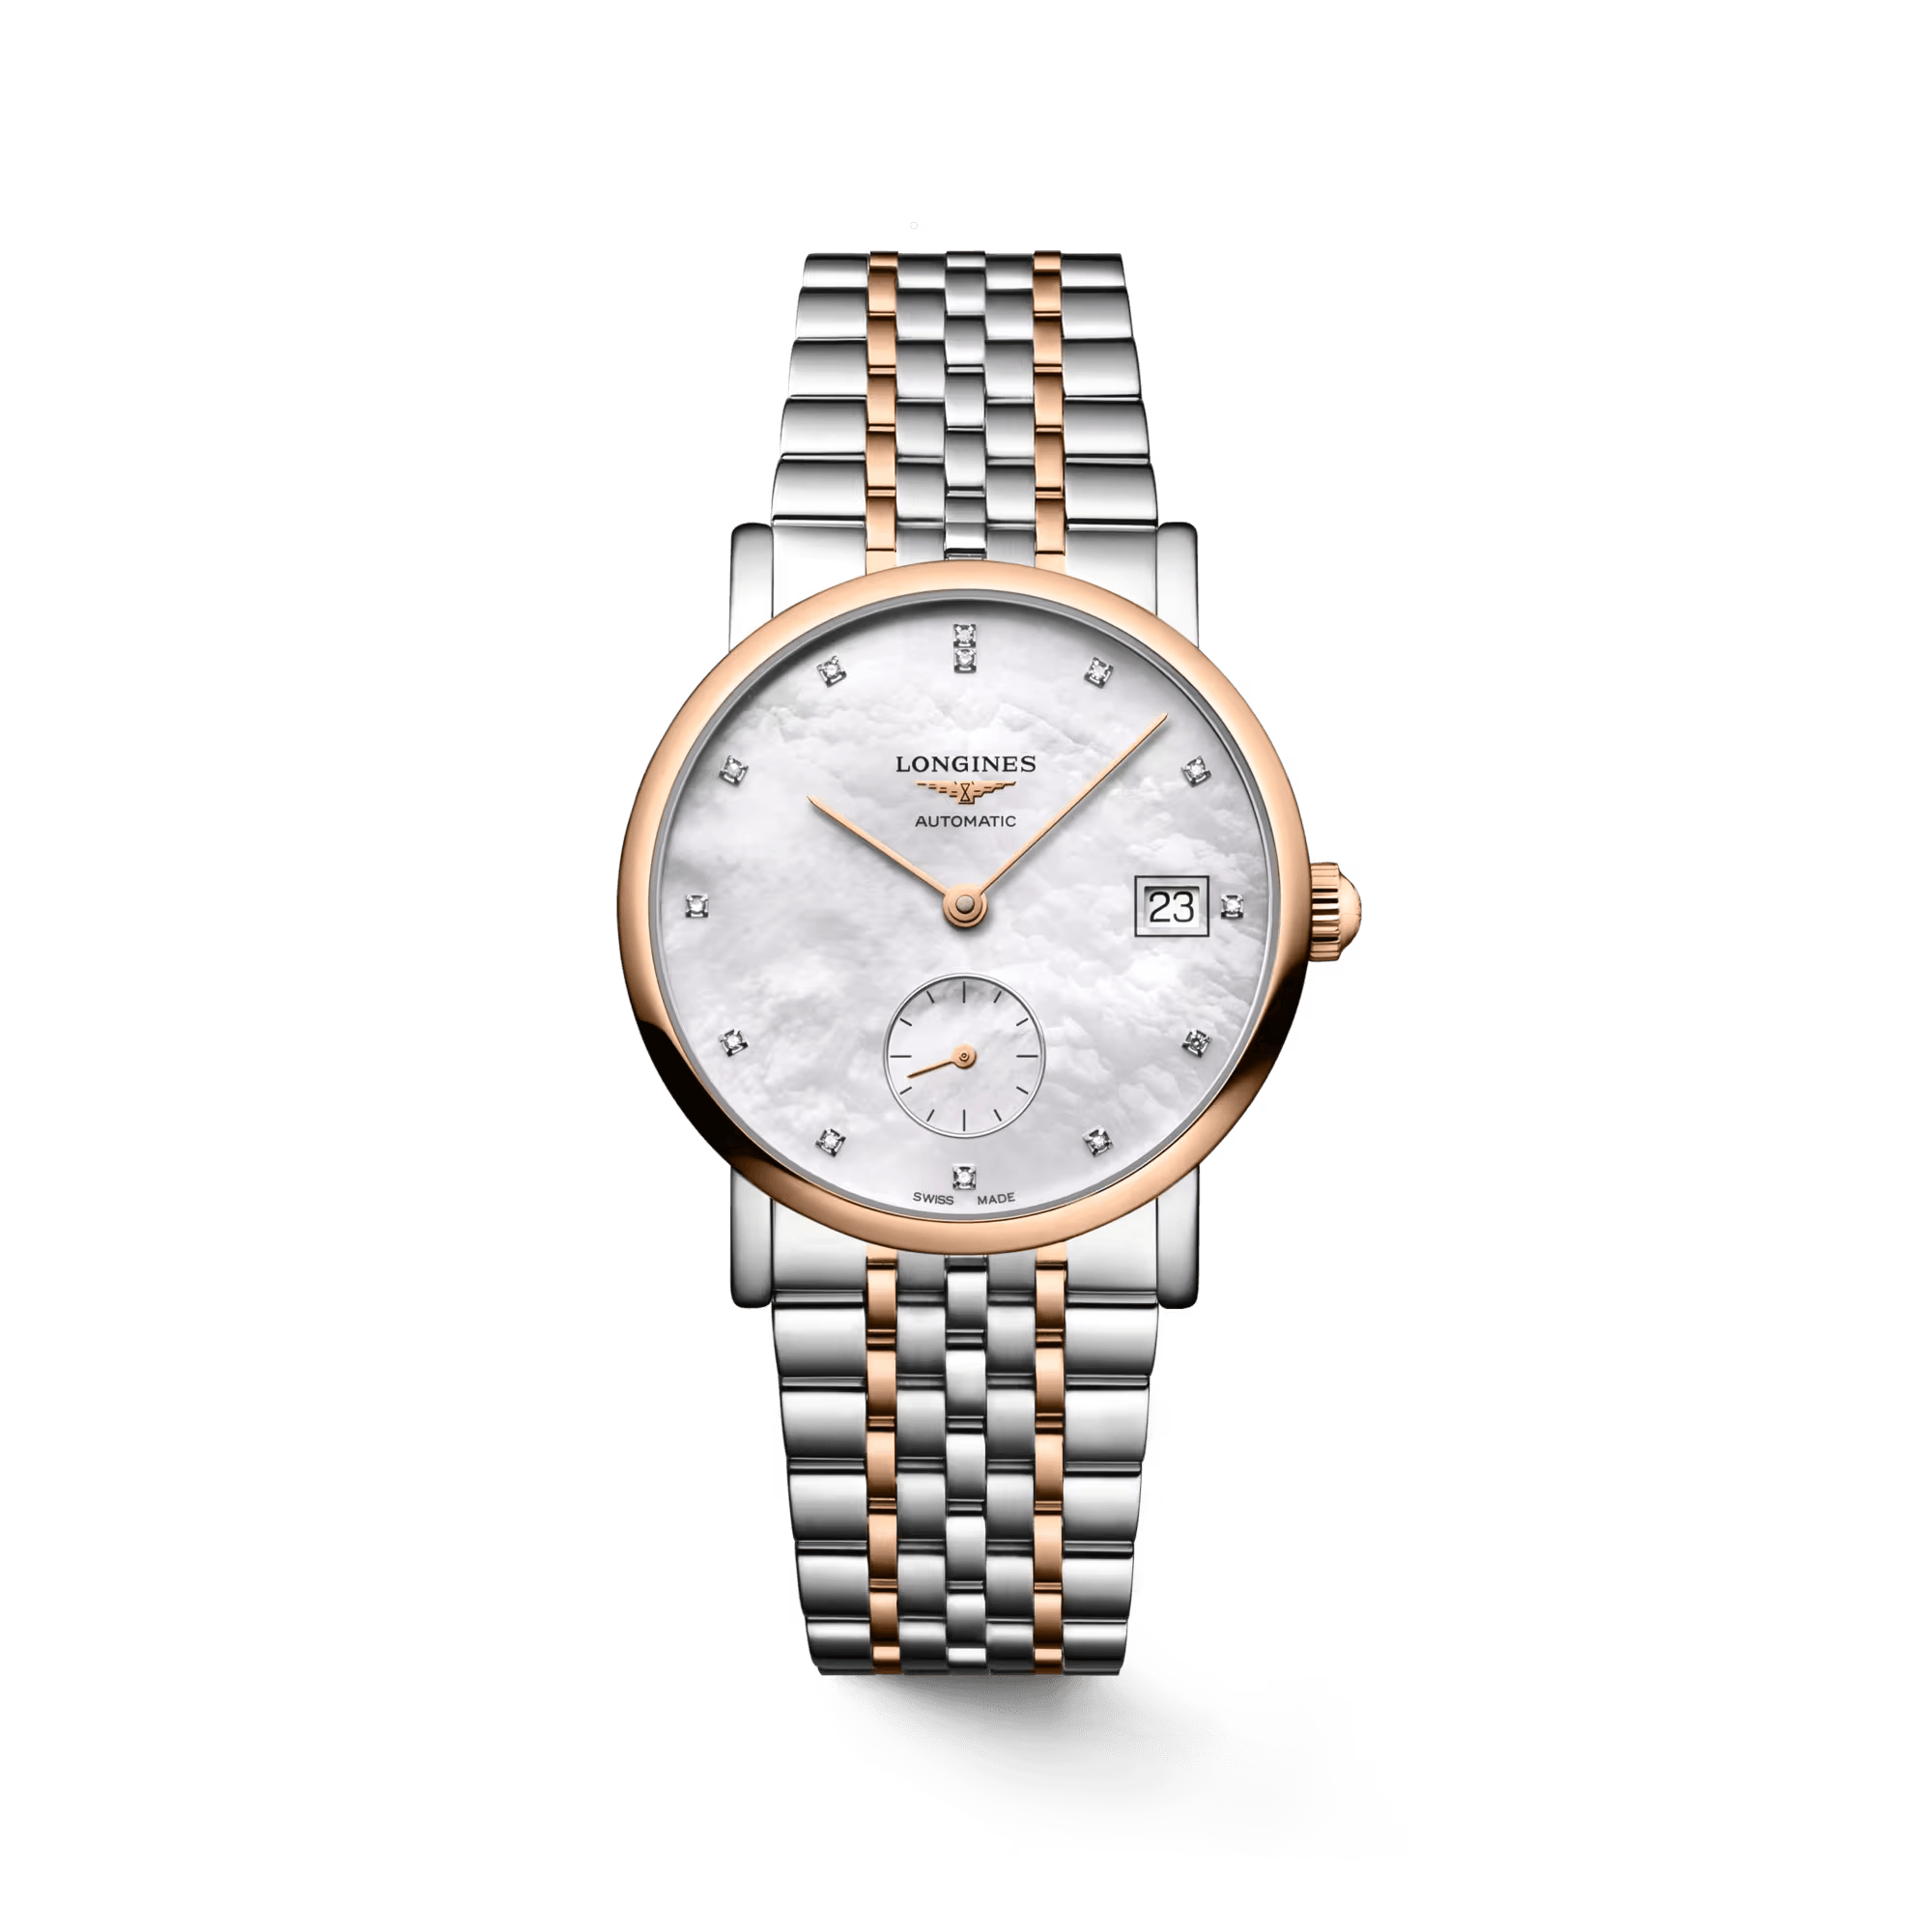 Longines The Longines Elegant Collection Automatic Women's Watch L43125877